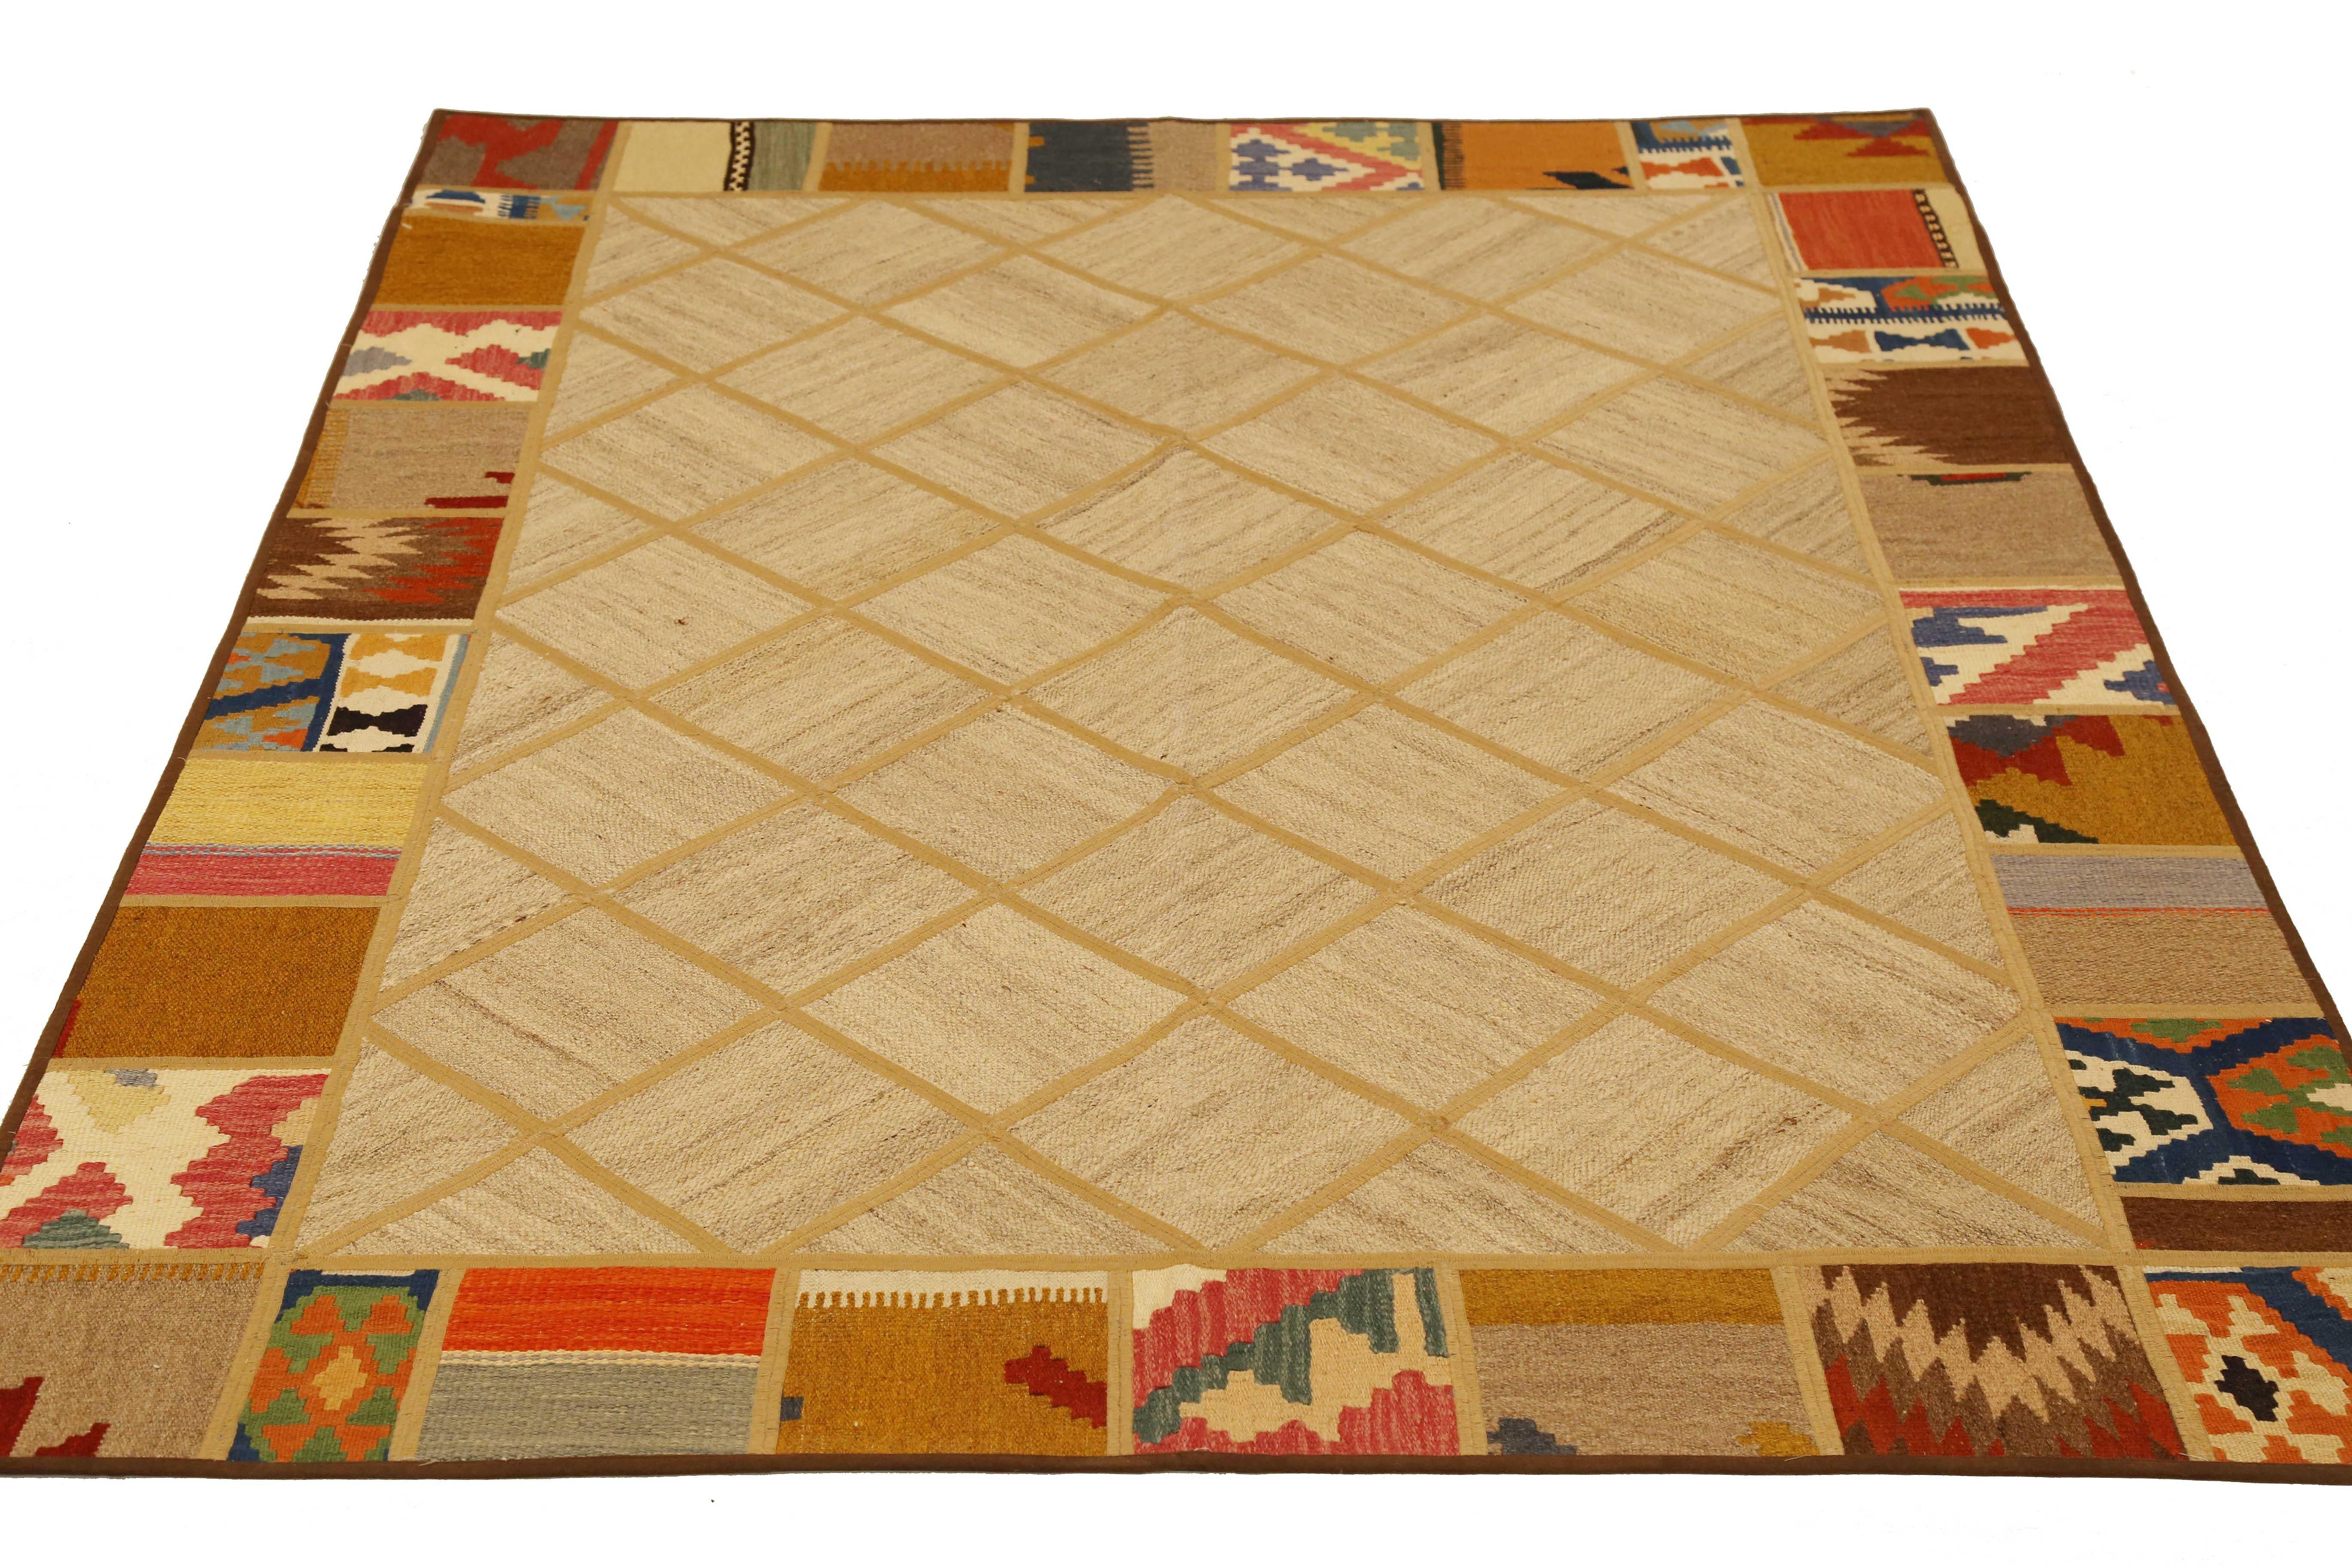 Modern Turkish rug handwoven from the finest sheep’s wool and colored with all-natural vegetable dyes that are safe for humans and pets. It’s a traditional Patch Kilim flat-weave design featuring colored tribal and geometric details. It’s a stunning